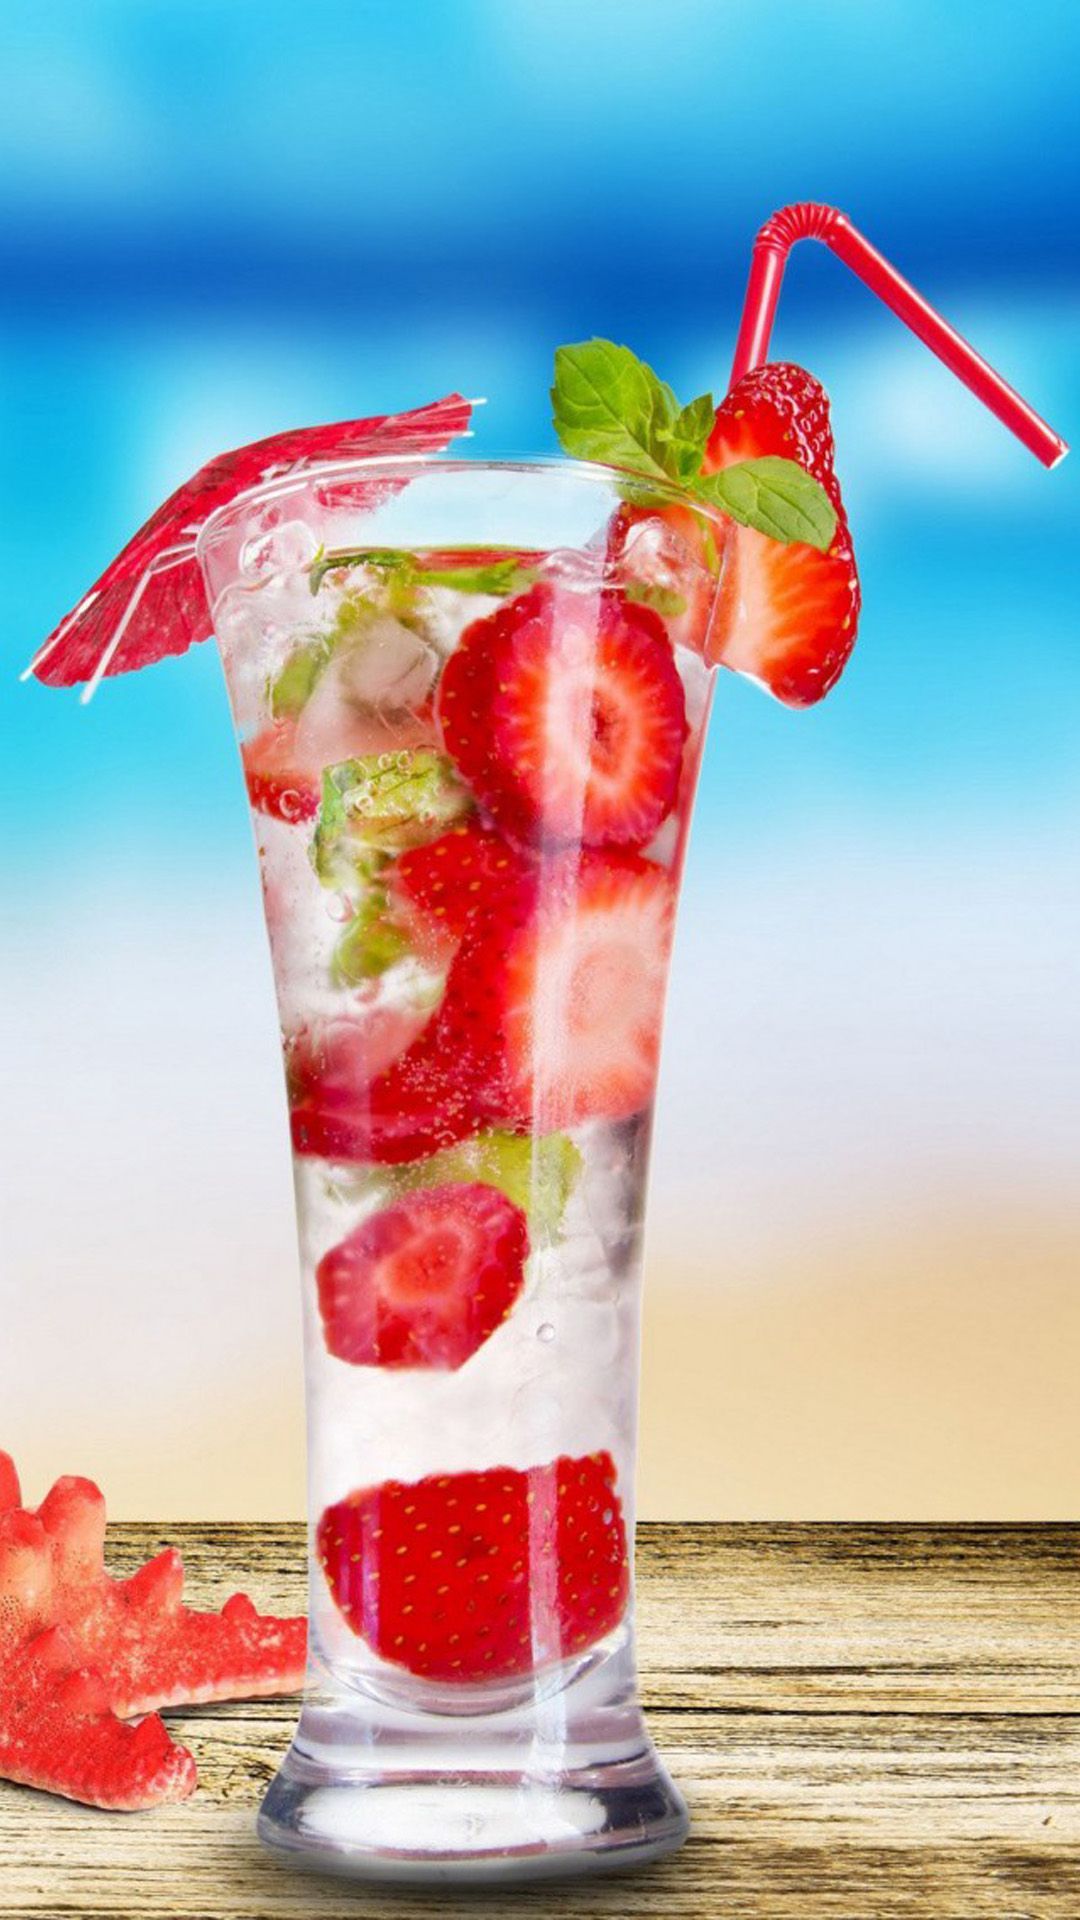 Food & Drinks Samsung Galaxy S5 Wallpaper 63. Summer drinks, Strawberry summer, Colorful drinks